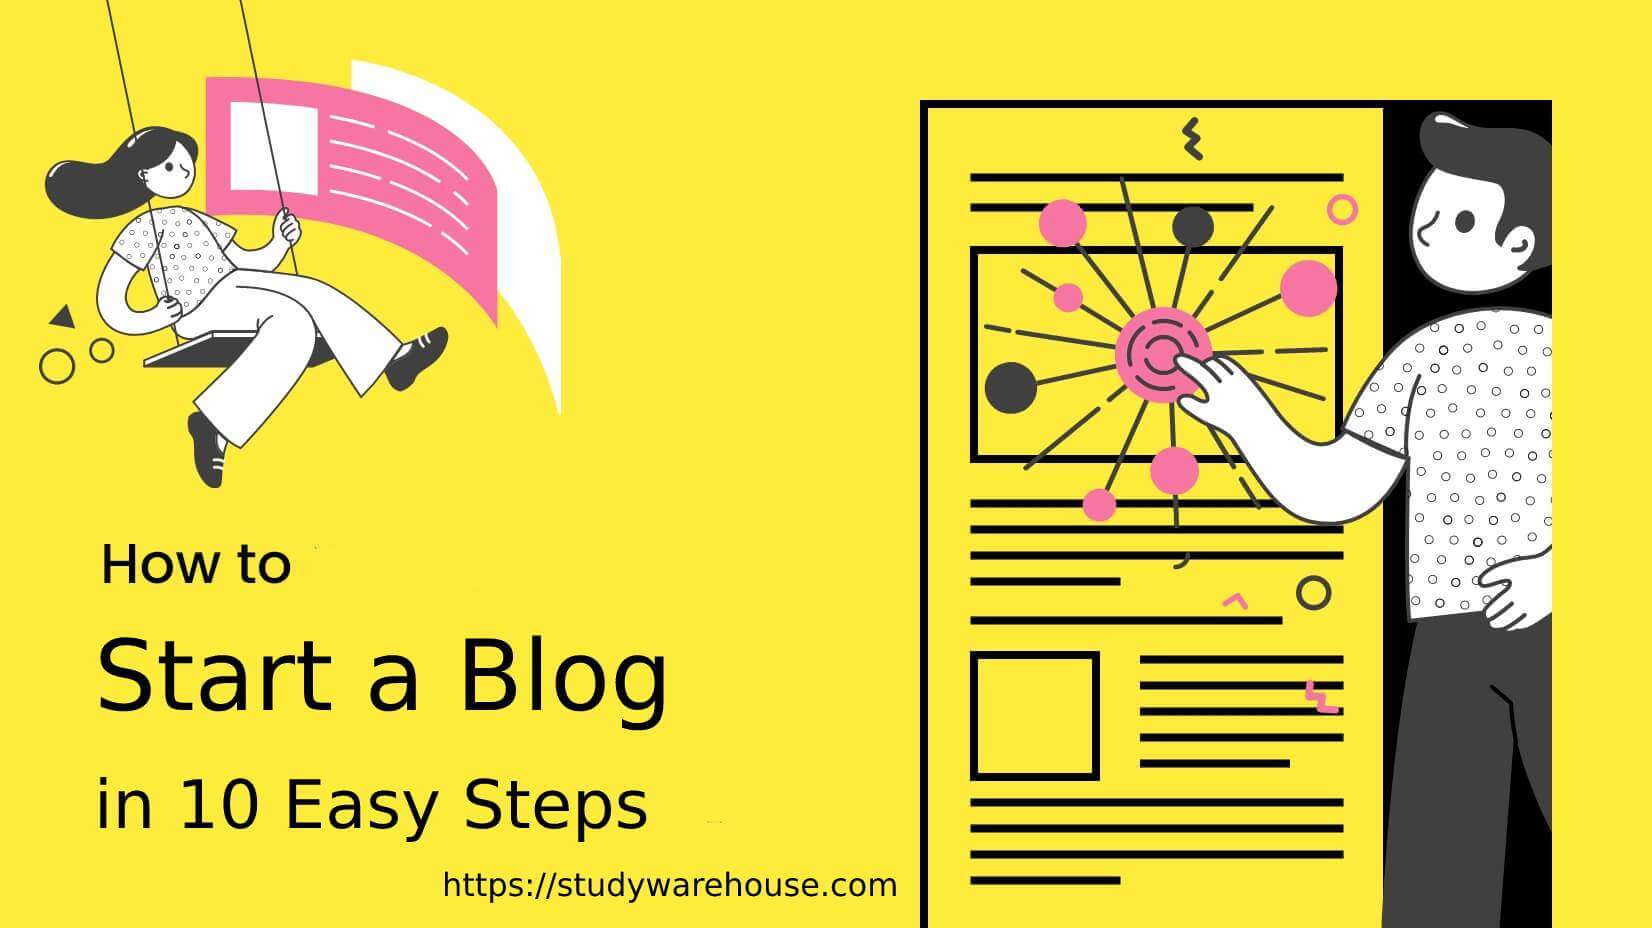 How to Start a Blog in 10 Easy Steps